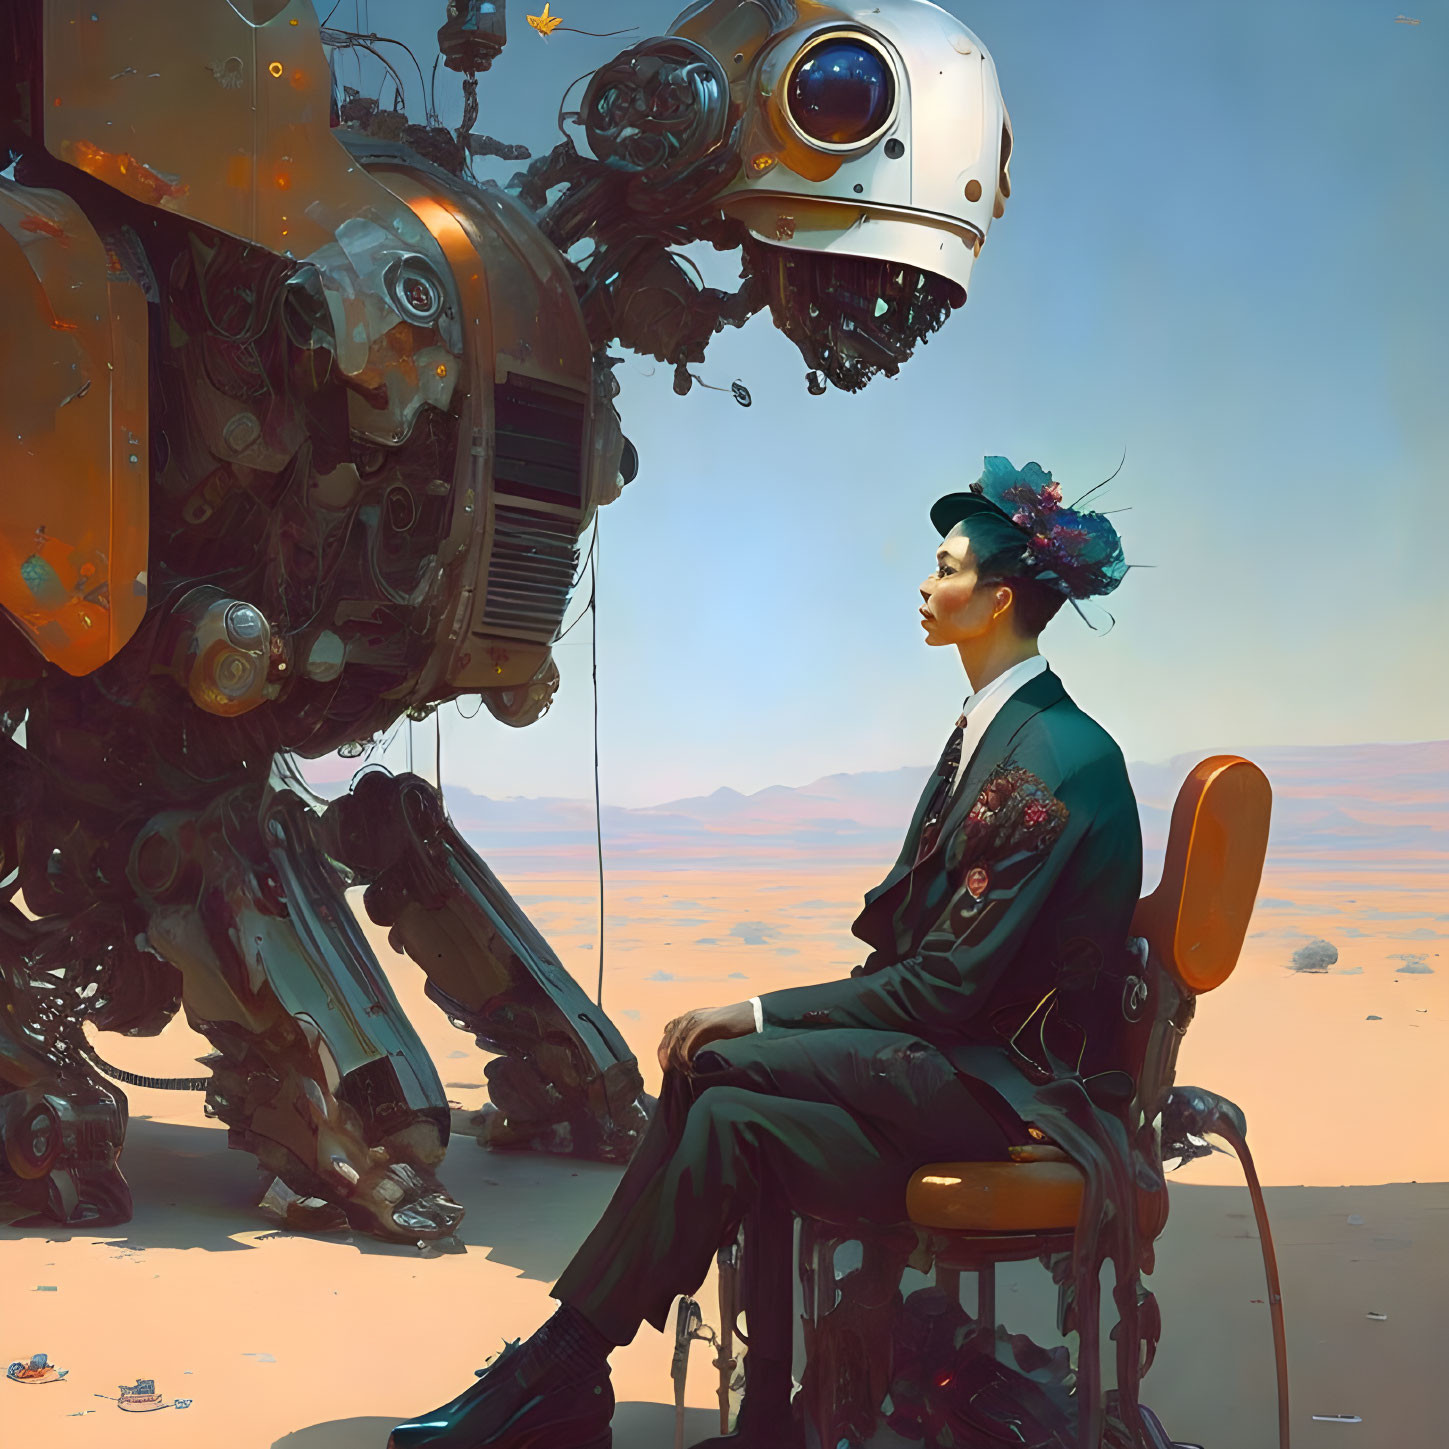 Person in suit with floral headpiece meets intricate robot in desert landscape